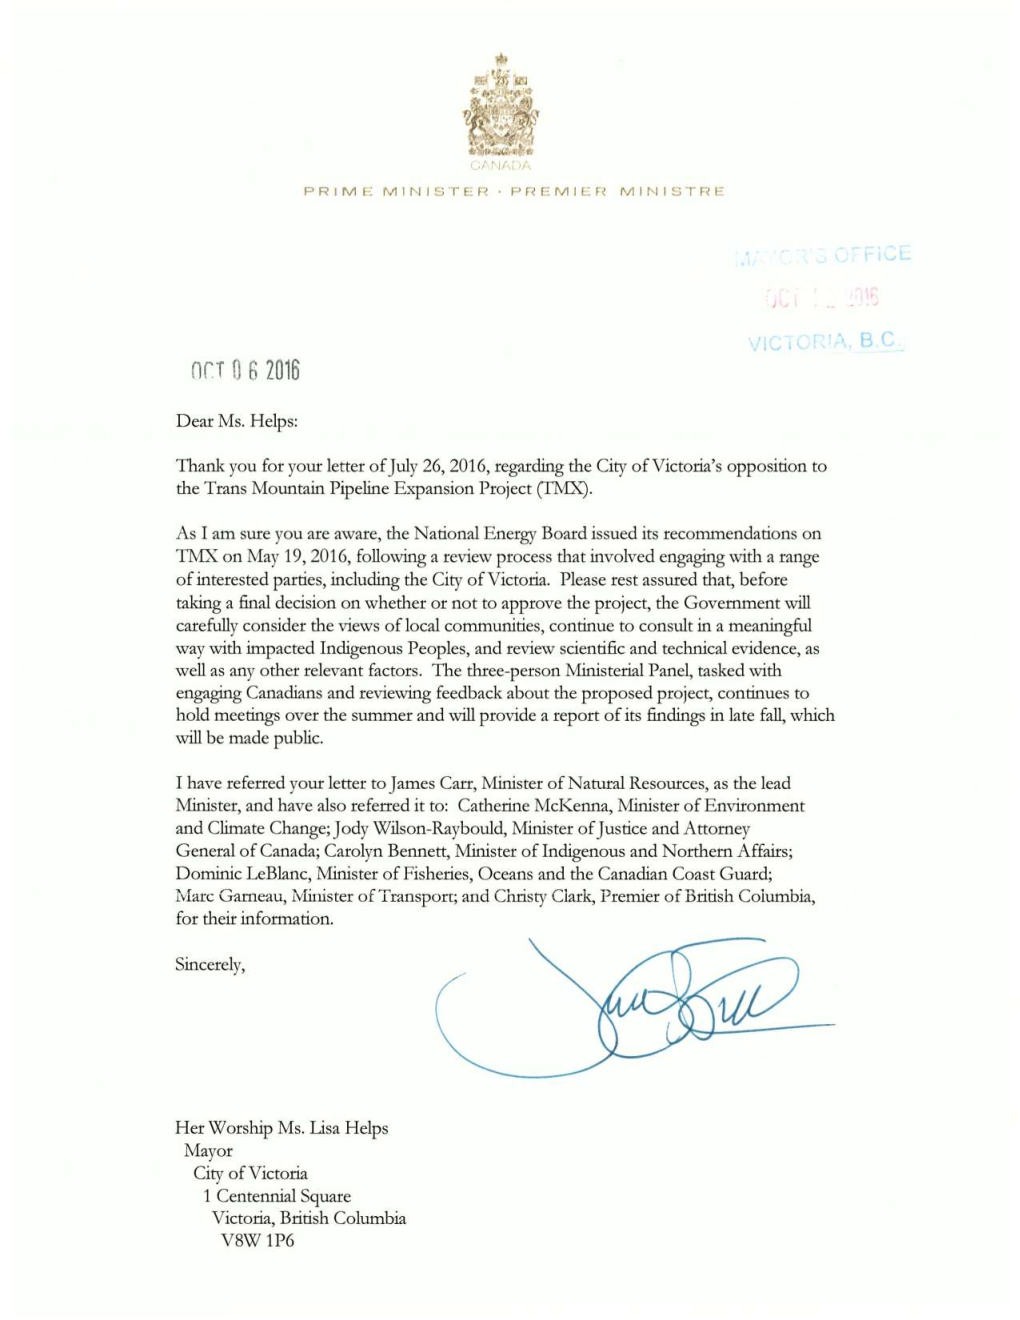 Letter from Prime Minister Justin Trudeau